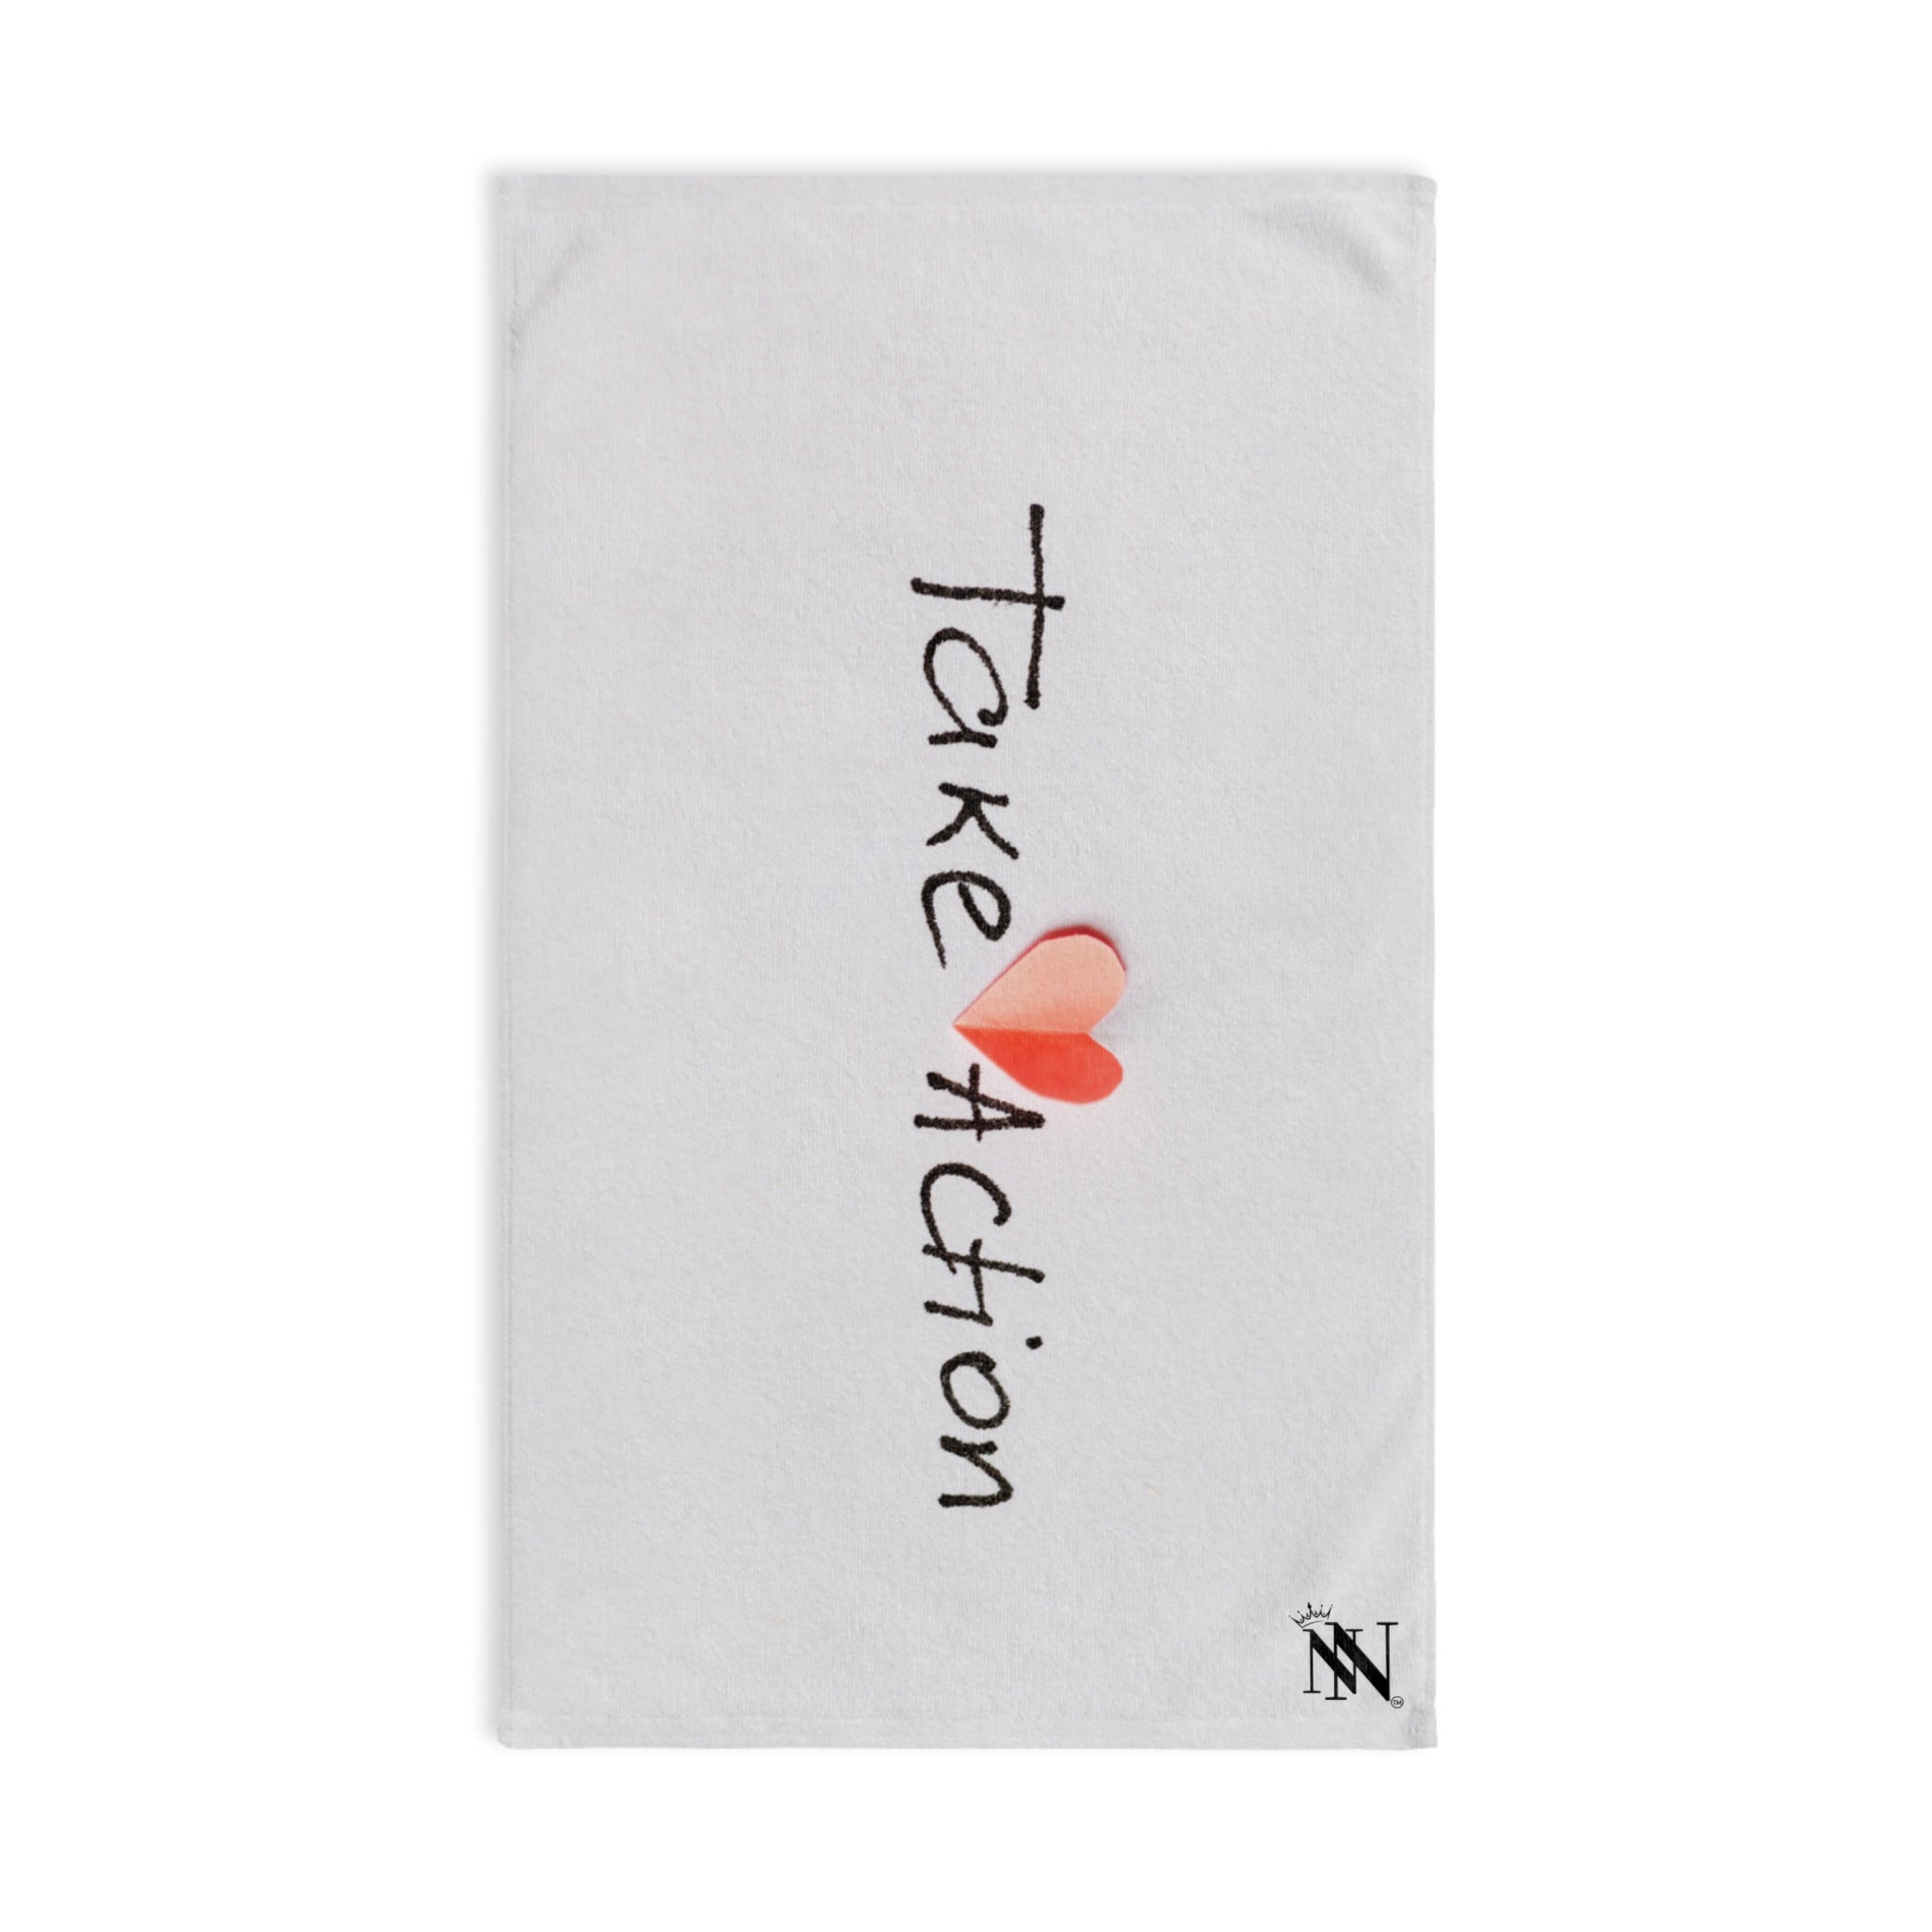 Take Action Paper White | Funny Gifts for Men - Gifts for Him - Birthday Gifts for Men, Him, Her, Husband, Boyfriend, Girlfriend, New Couple Gifts, Fathers & Valentines Day Gifts, Christmas Gifts NECTAR NAPKINS